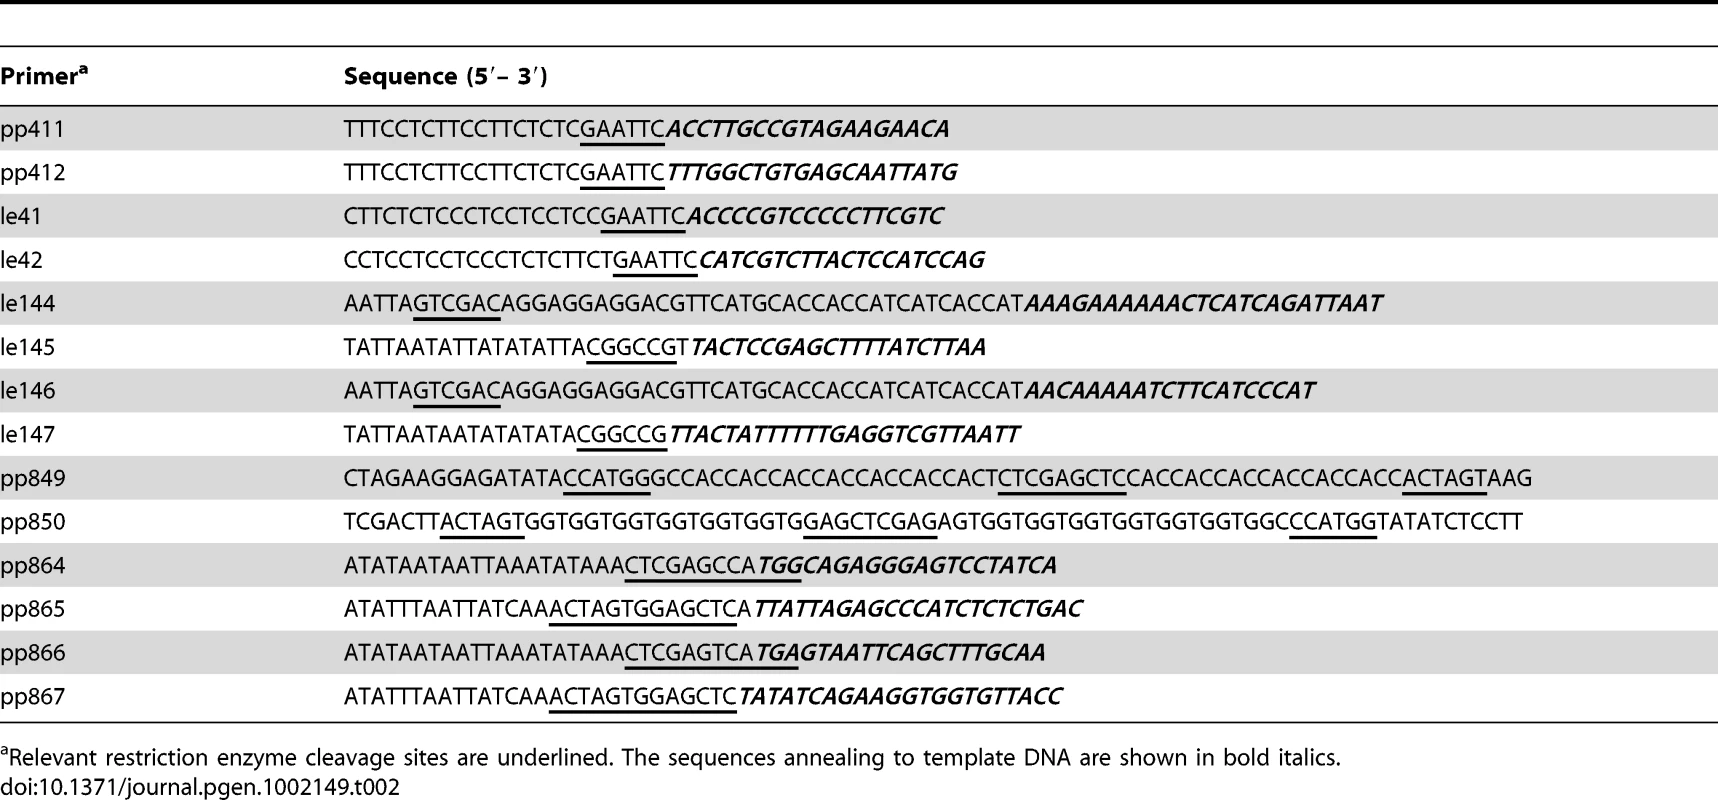 DNA oligonucleotides used as PCR primers for plasmid construction and cloning.